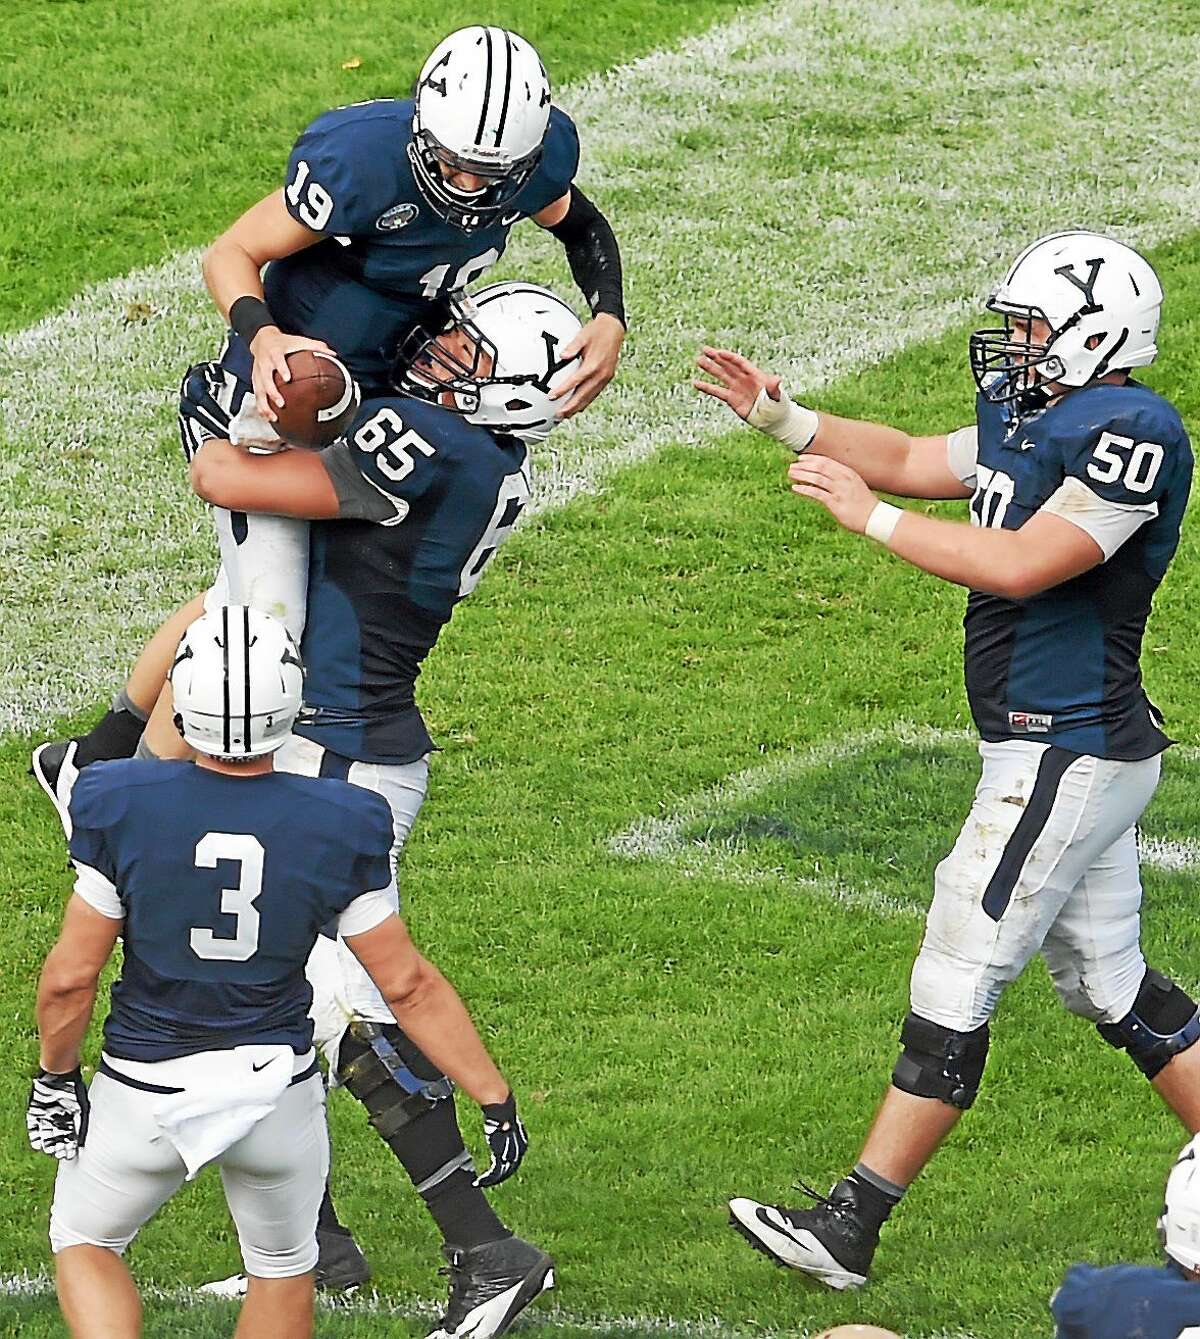 Yale quarterback Morgan Roberts is lifted up in the end zone by teammate Khalid Cannon after Roberts scored a touchdown during the fourth quarter of the Bulldogs’ 54-43 win over Lehigh on Saturday at Yale Bowl.